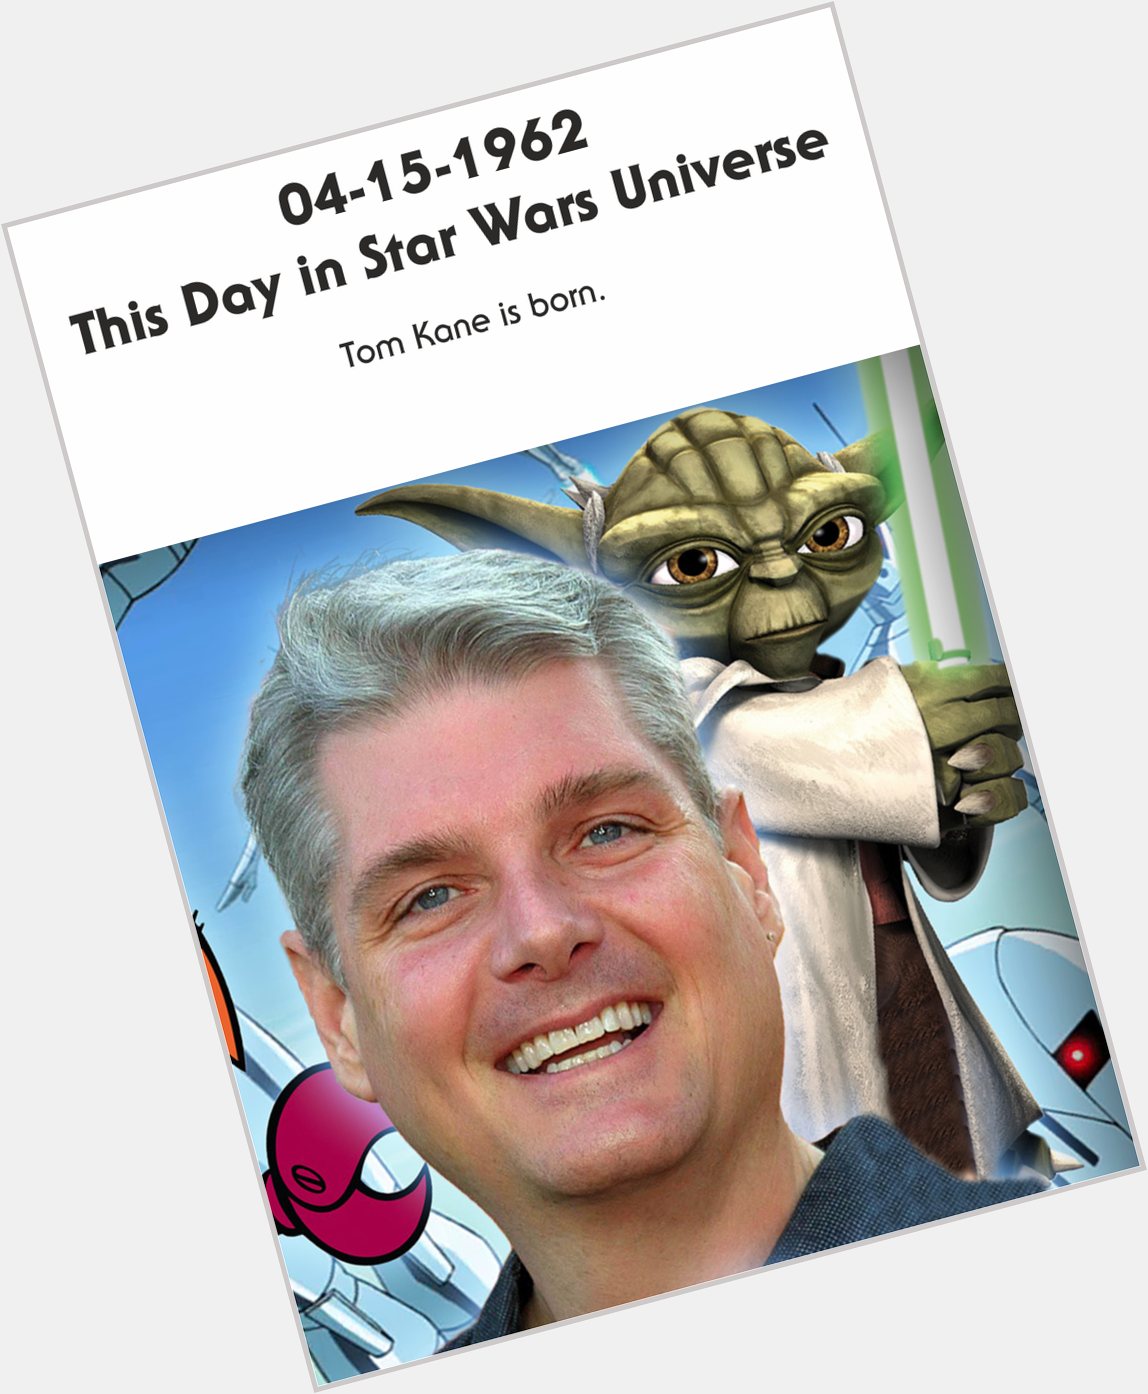 04-15-1962 Happy Birthday Tom Kane!
One of the most prolific Star Wars voice actor. 